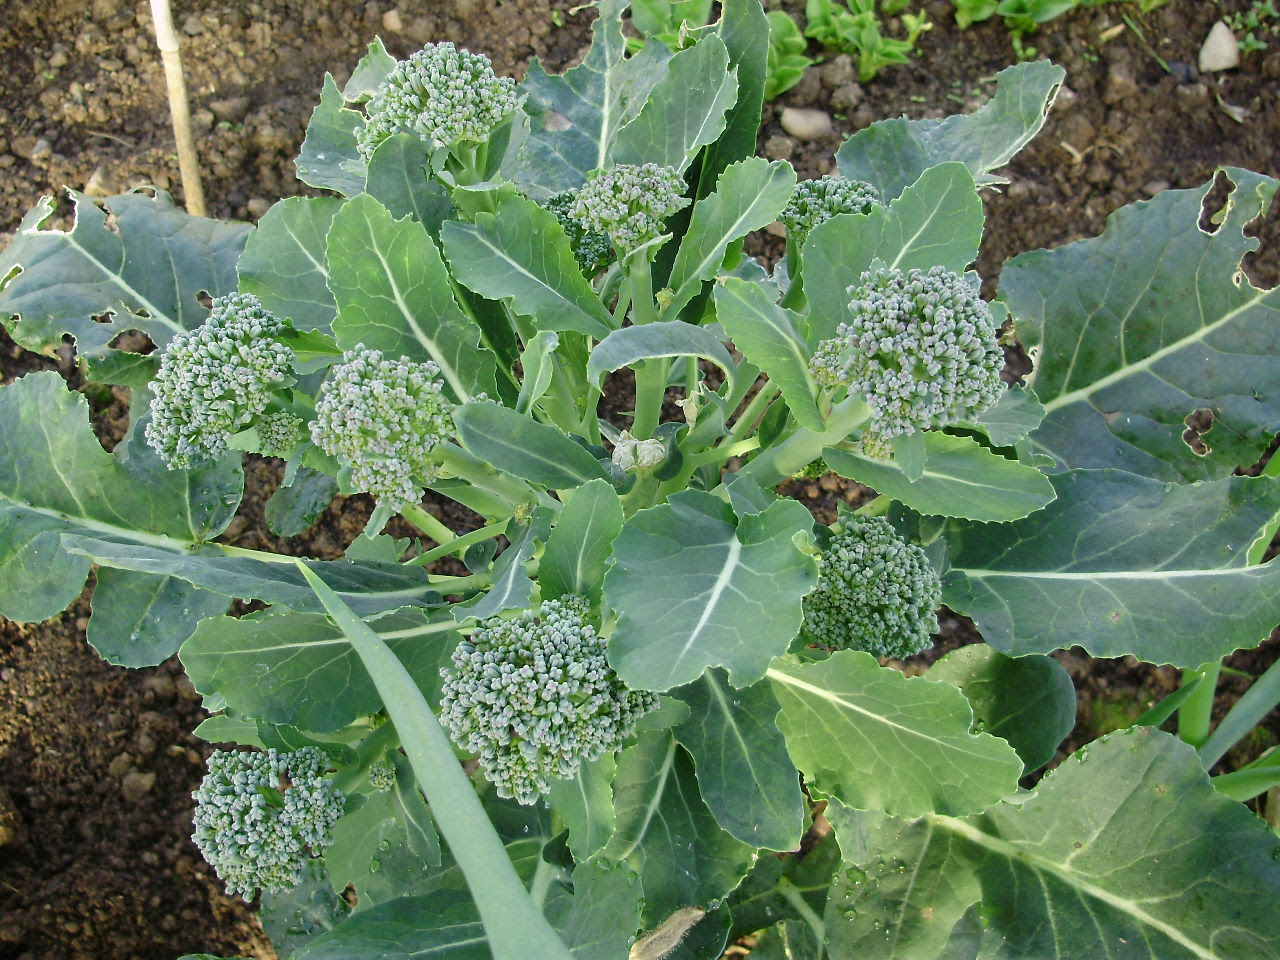 Calabrese broccoli 'Green Magic' making nice side shoots after central head cut